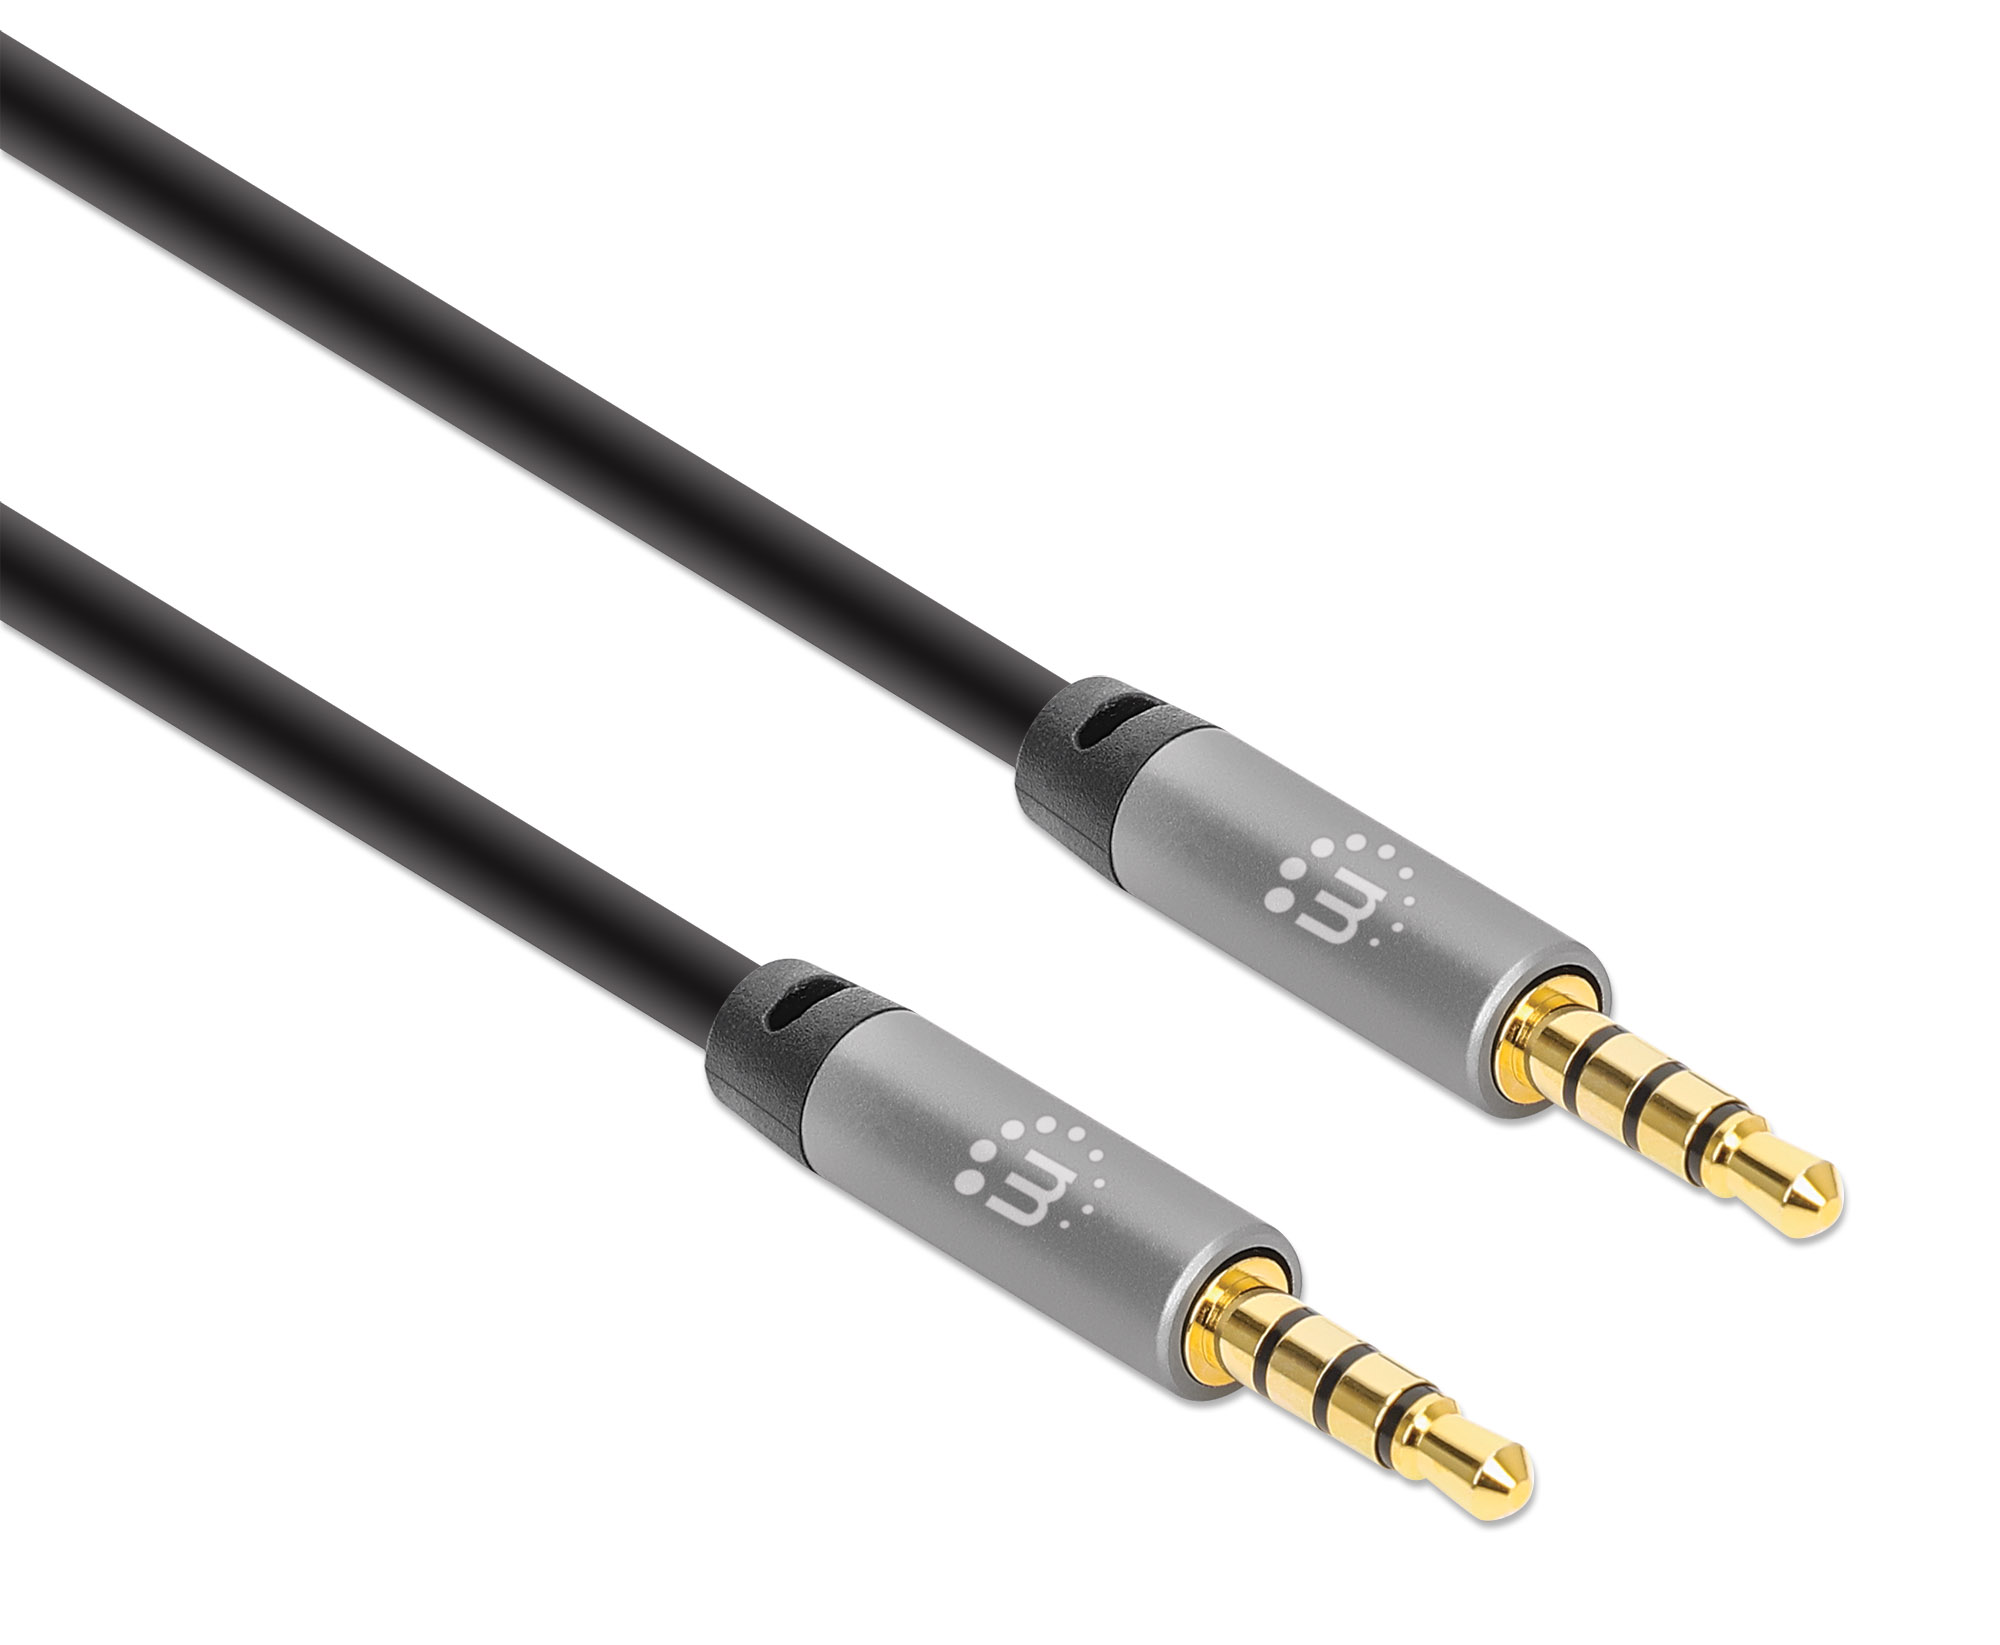 2x 1m Cavo AUX 3.5mm Jack Spina Audio Stereo mp3 Auto Cellulare Laptop 